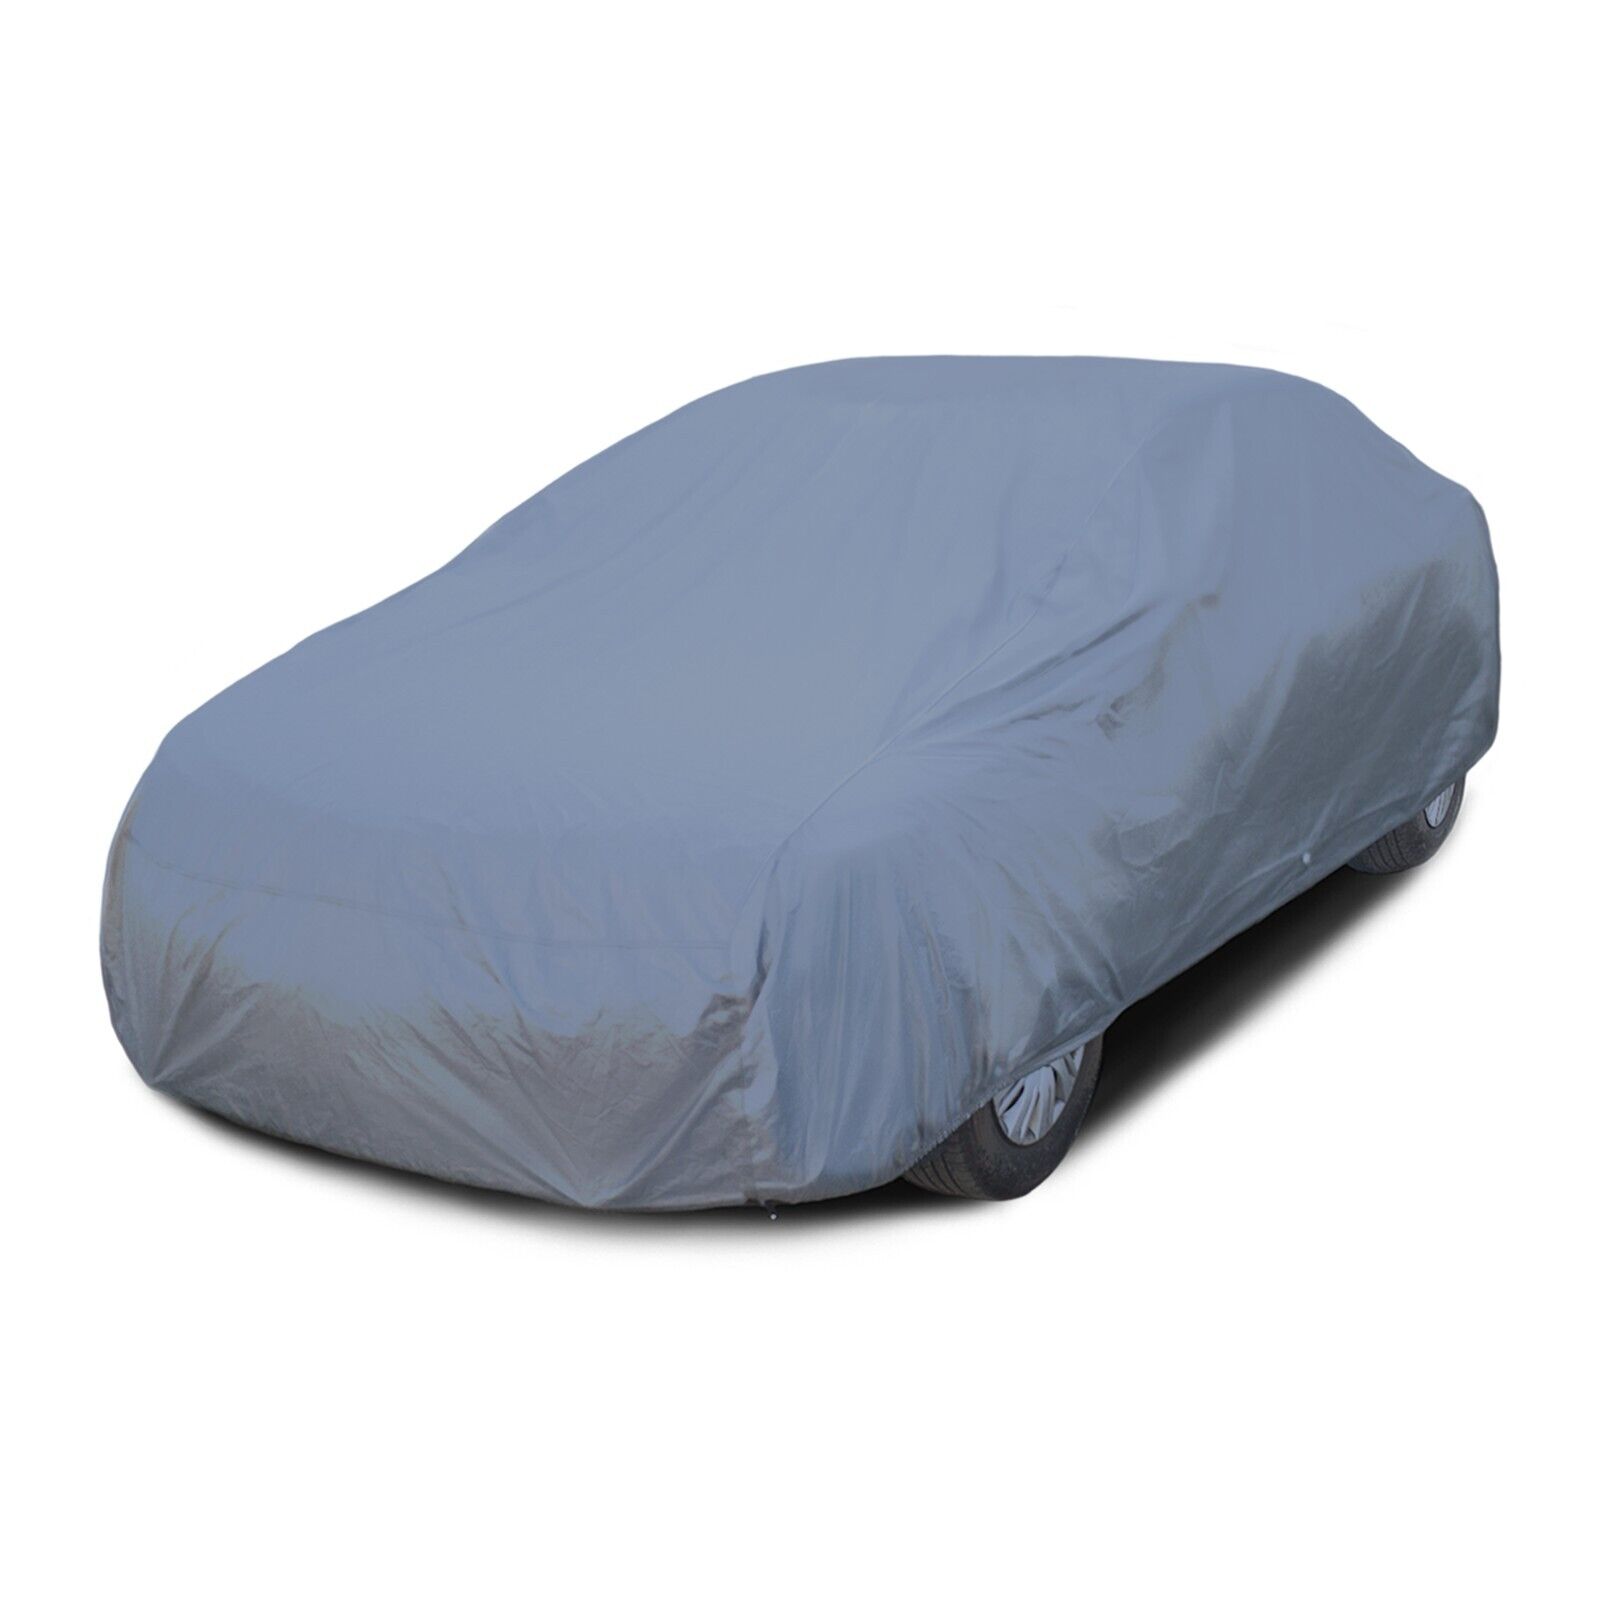 DaShield Ultimum Series Waterproof Car Cover for Toyota Paseo Cynos 1991-1999